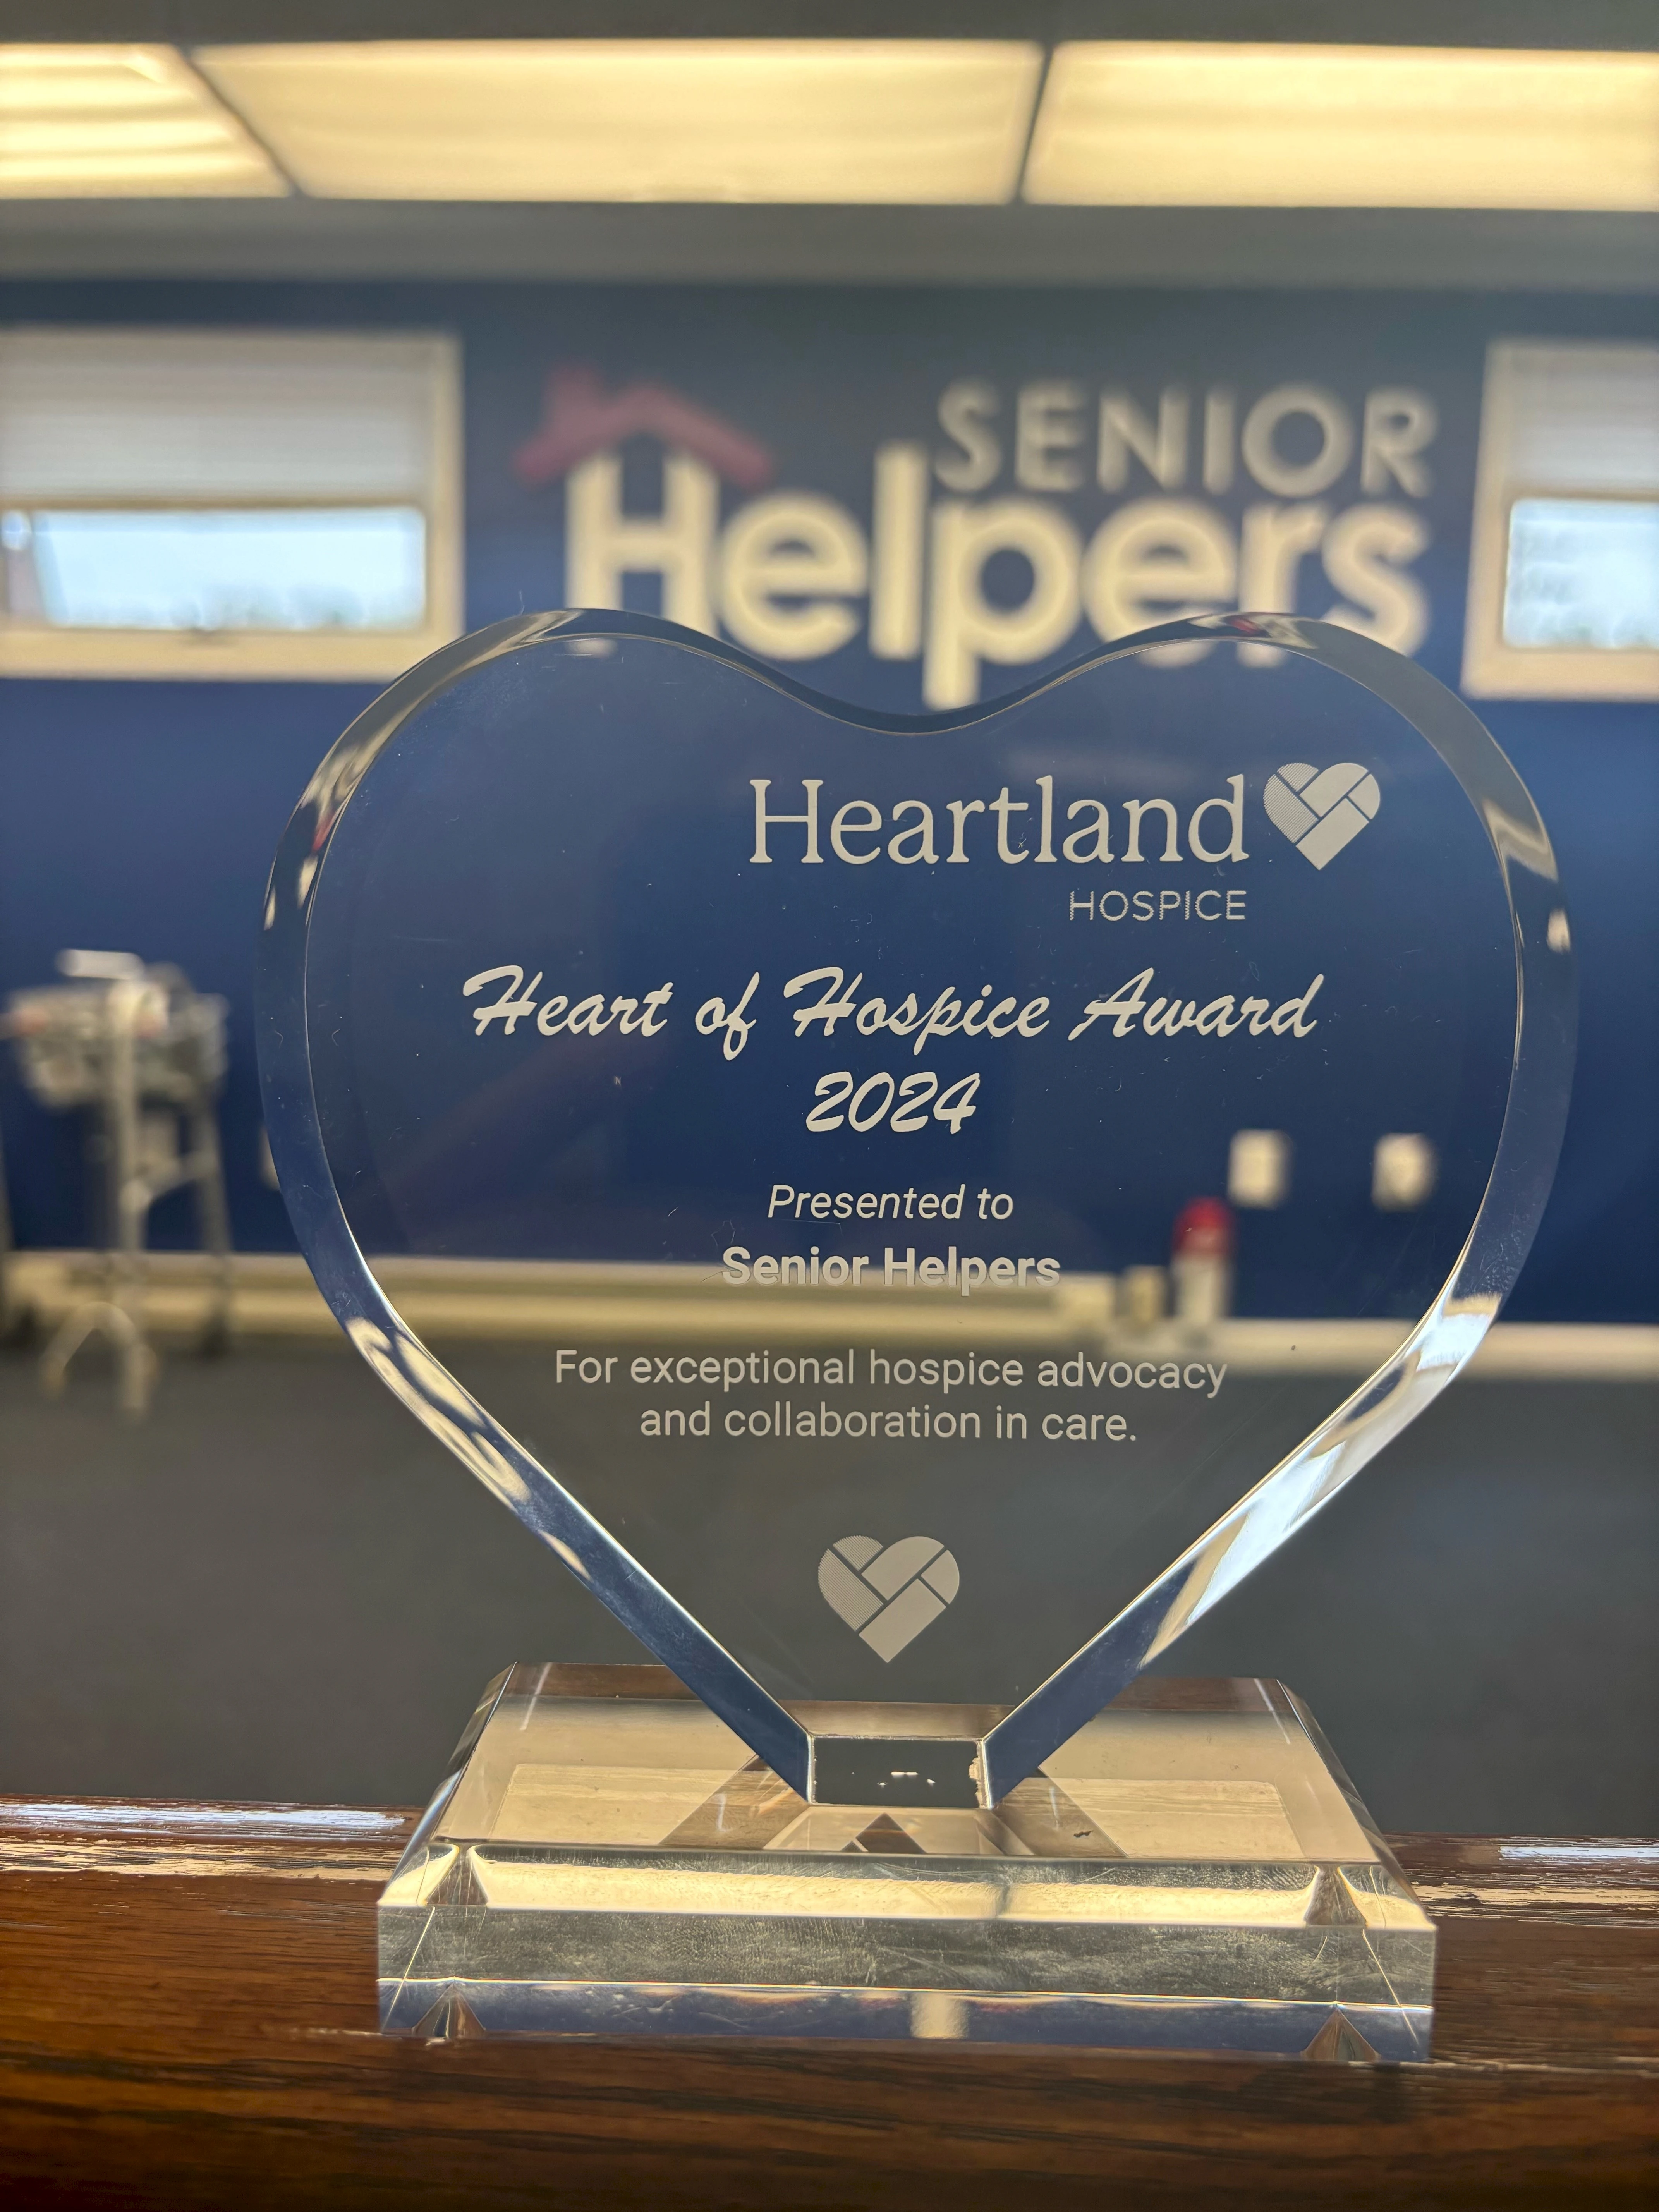 Senior Helpers Lancaster County Receives Heart of Hospice Award